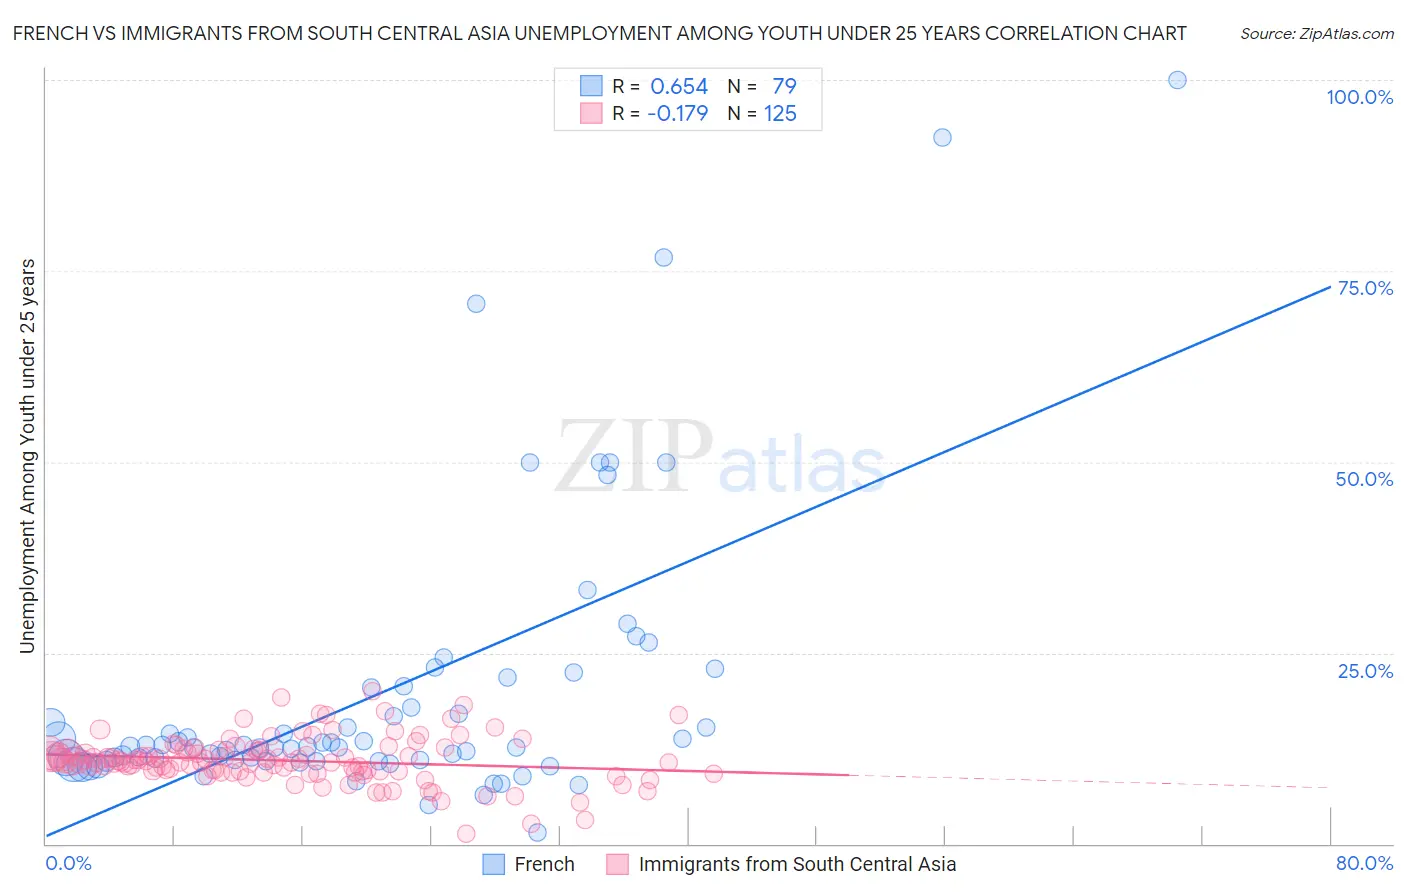 French vs Immigrants from South Central Asia Unemployment Among Youth under 25 years